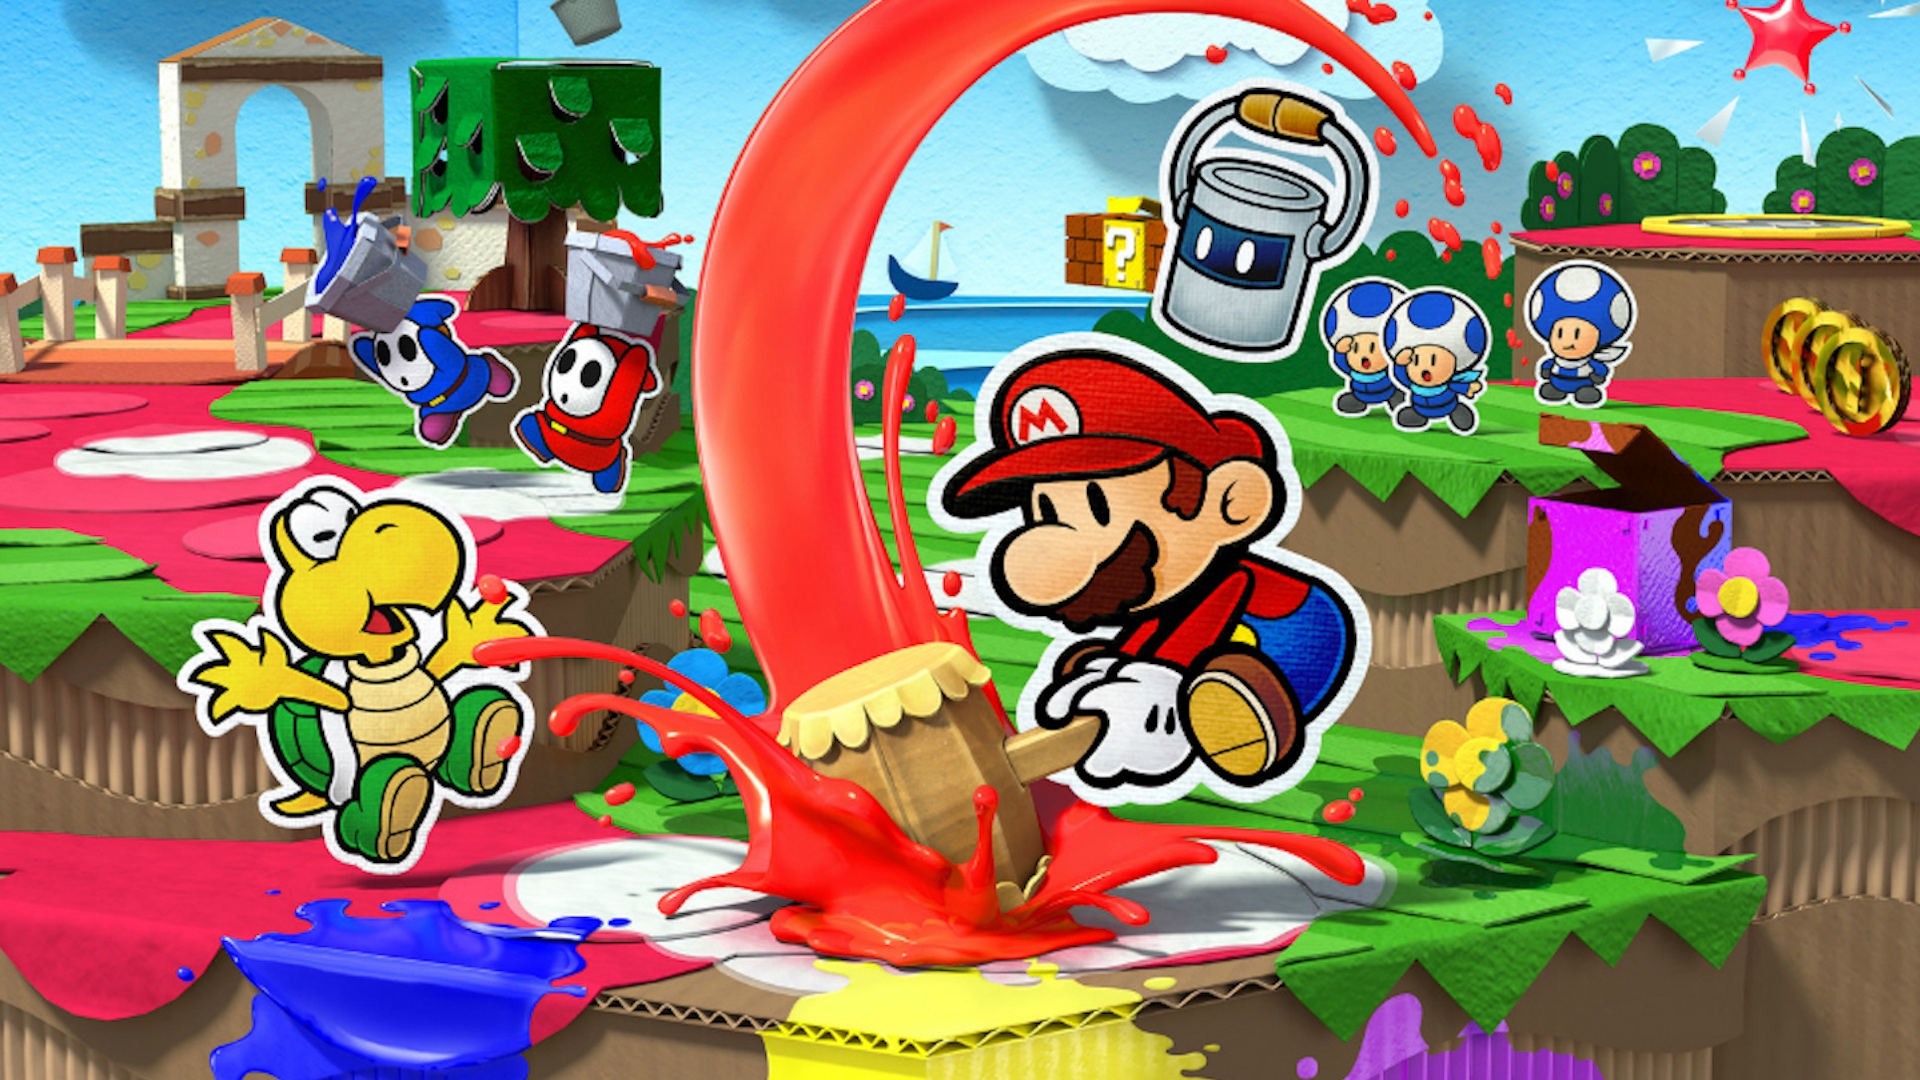 Rumoured Paper Mario Game Will Go Back to the Series’ Roots